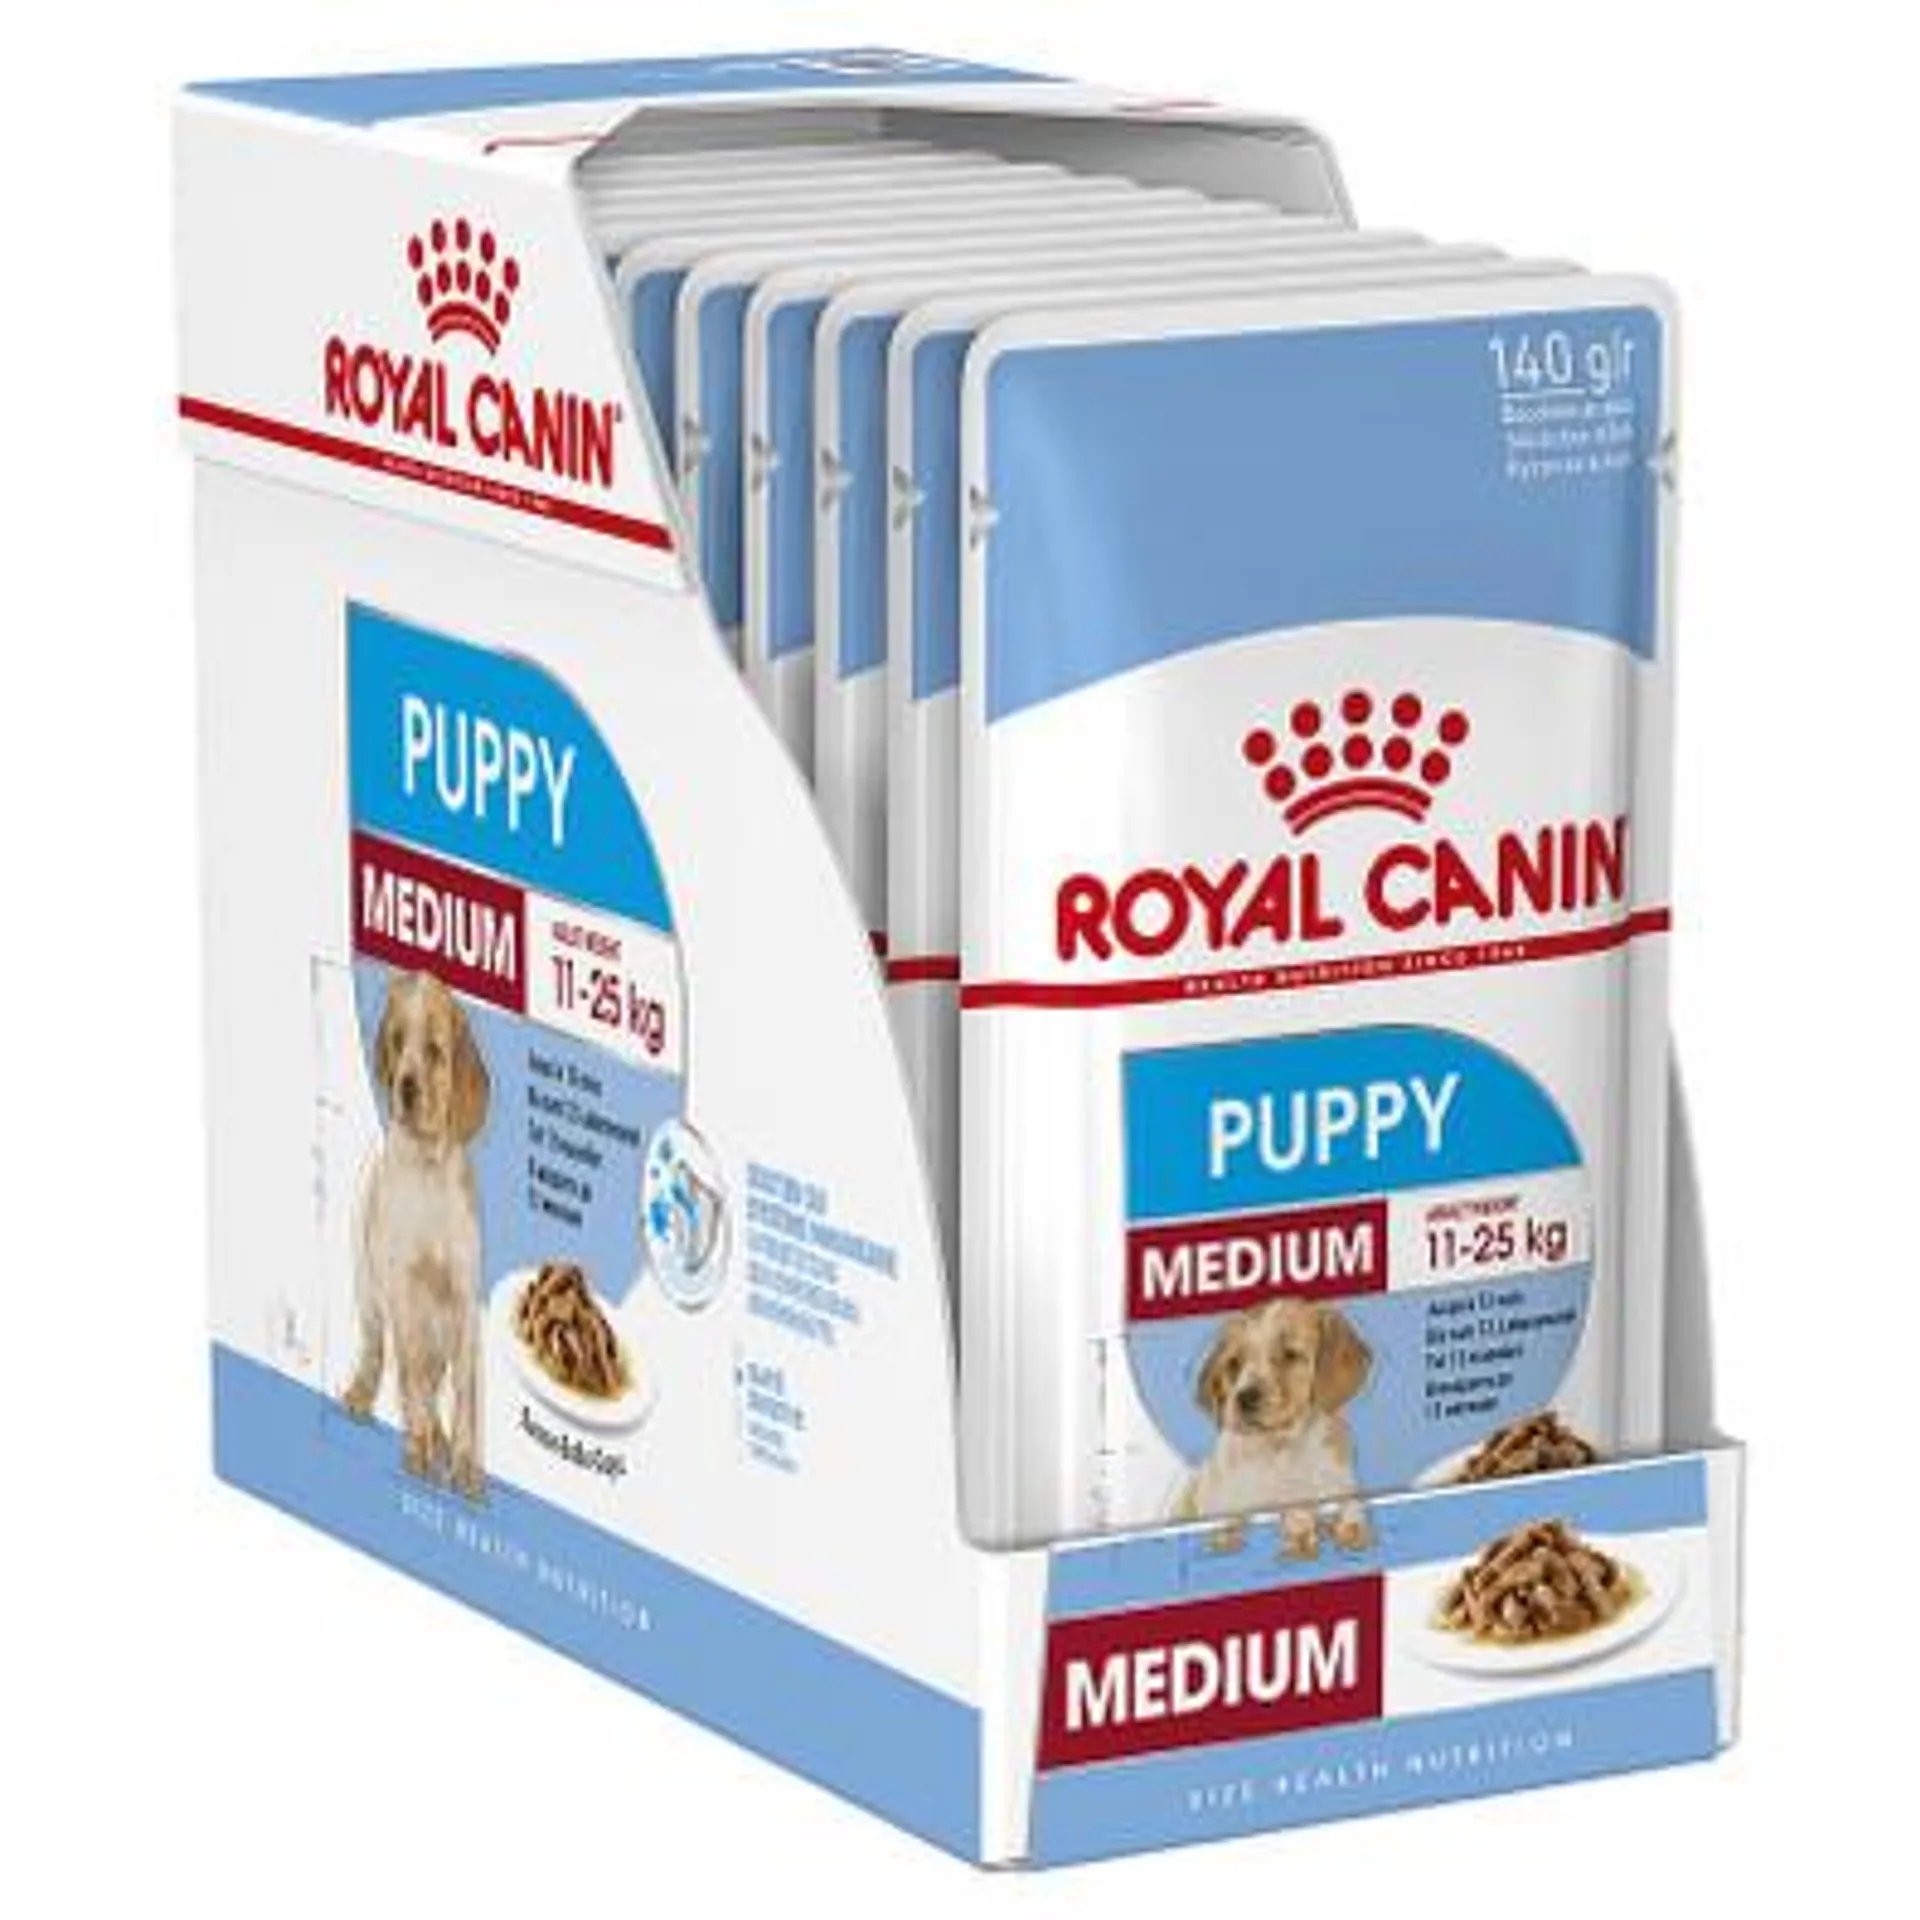 Royal Canin Medium Puppy Wet Dog Food Pouches